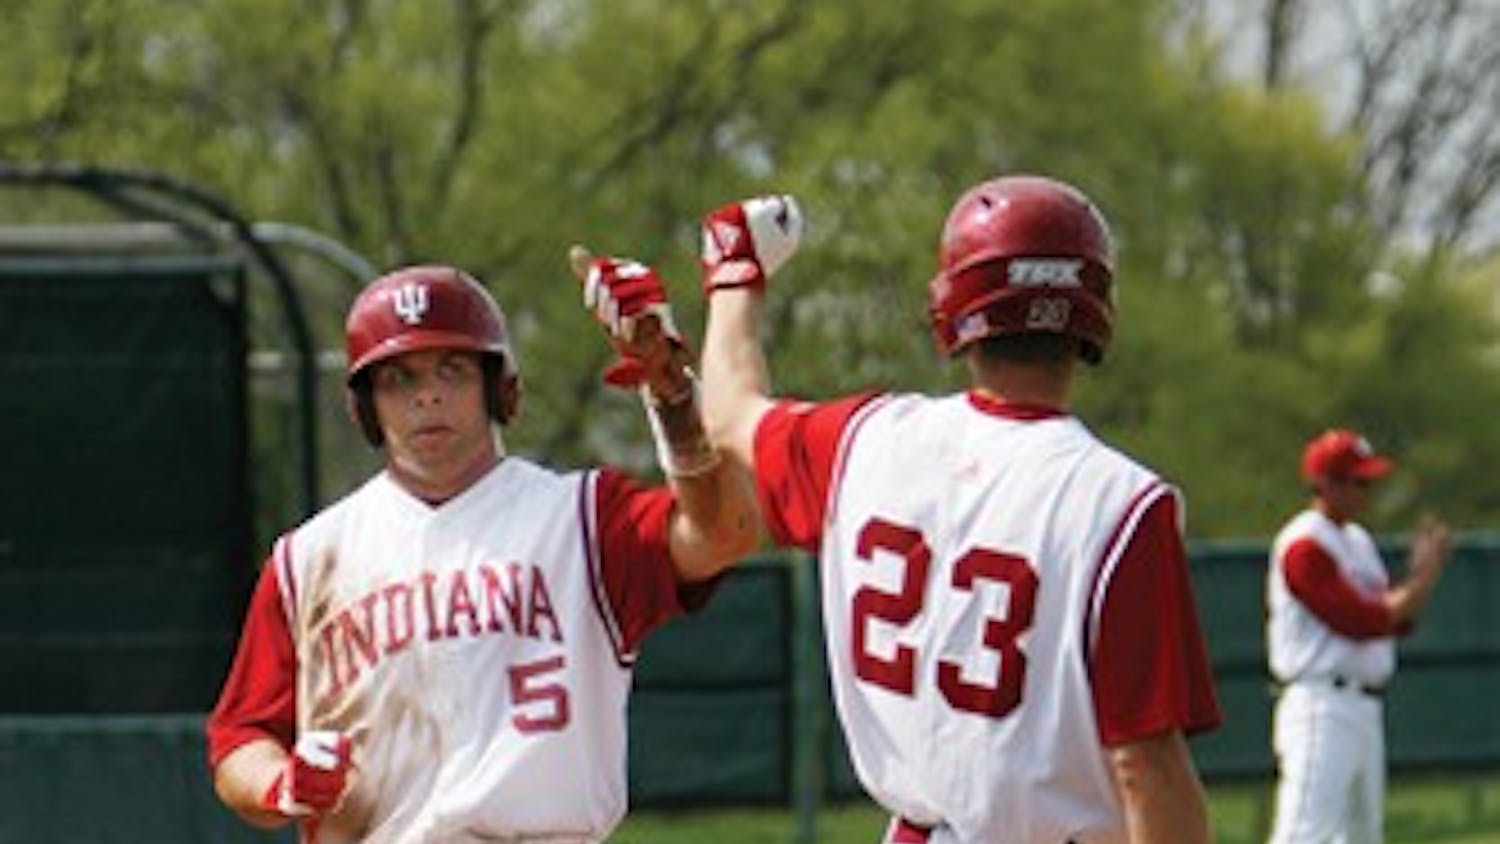 Brandon Foltz / IDS
IU junior outfielder Andrew Means (5) greets teammate Kipp Schutz (23) after scoring a run against Indiana State Wednesday afternoon at Sembower Field. The Hoosiers defeated the the Sycamores 7-2.